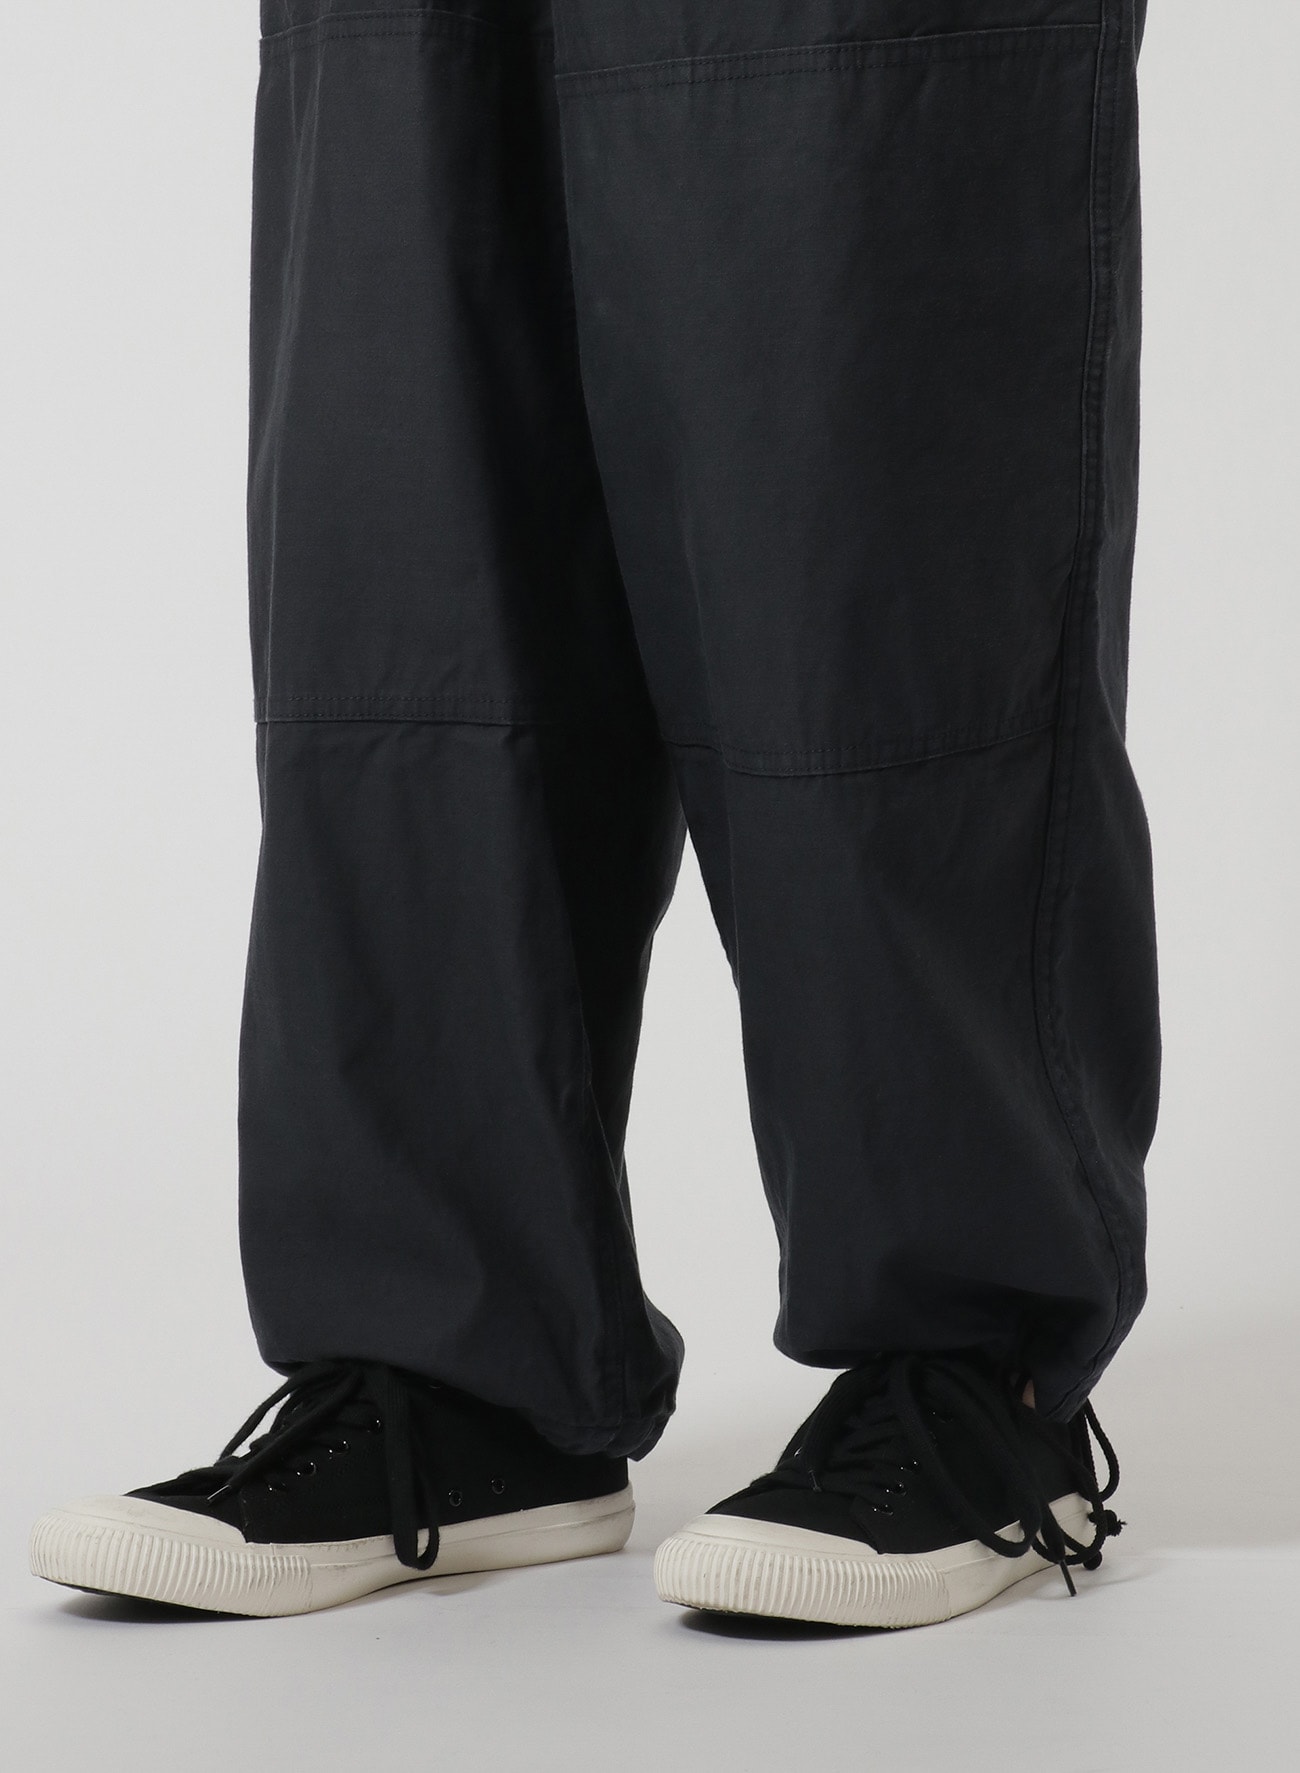 [Y's-Black Name]BACKSIDE SULFURIZATION SATIN PANTS WITH KNEE PADS